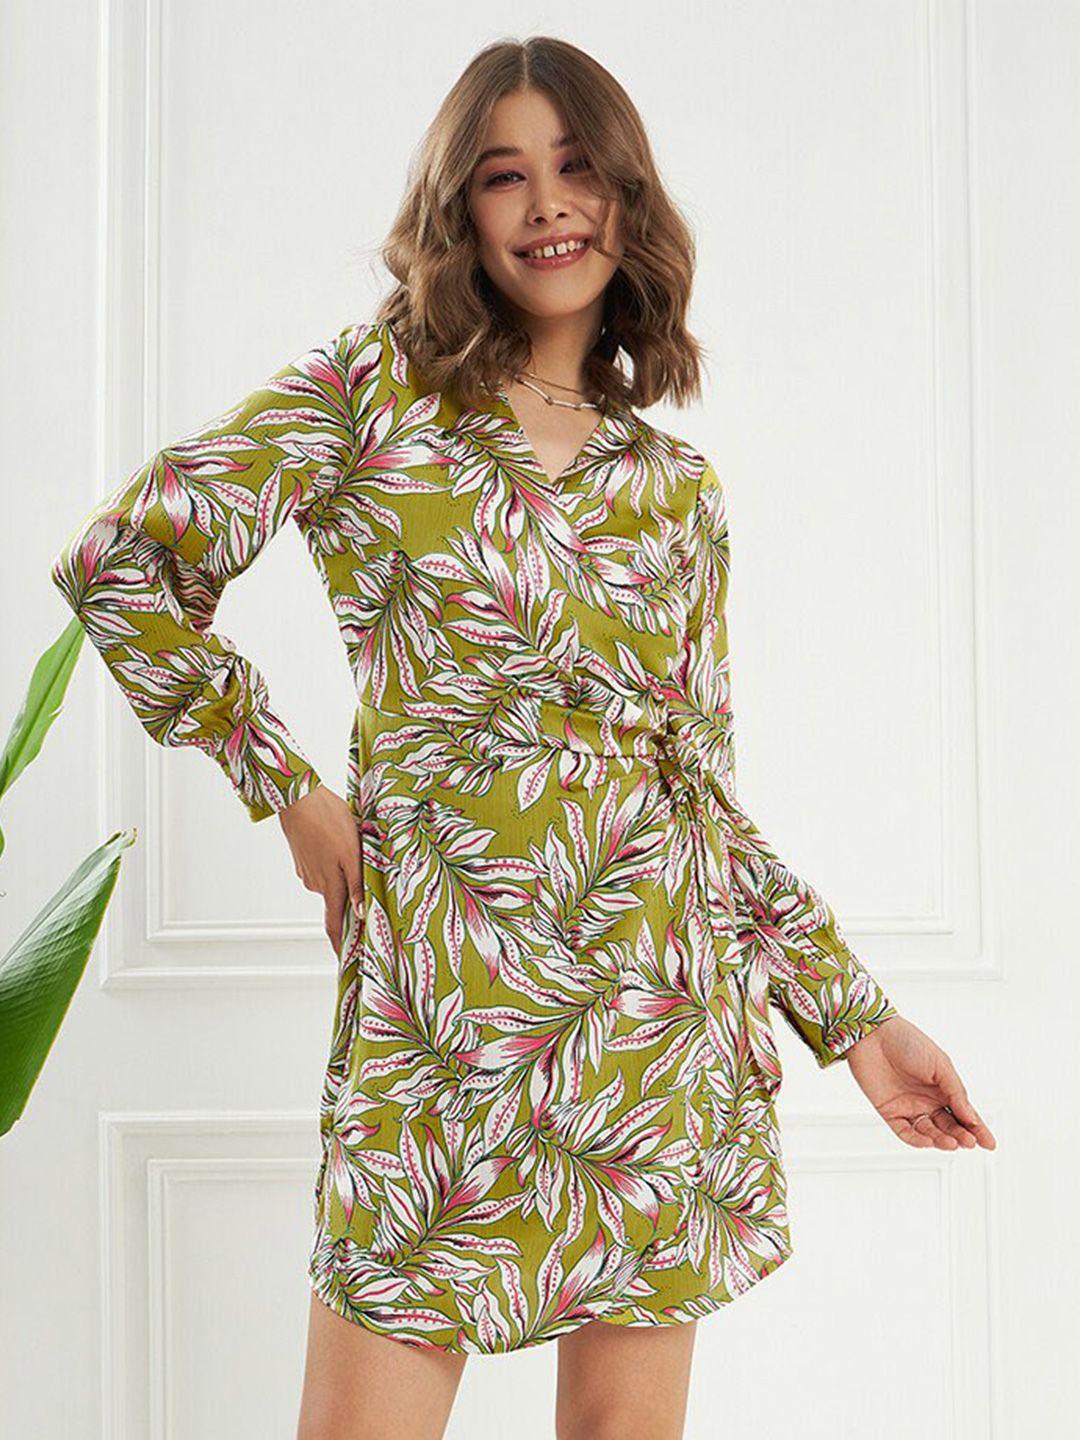 kassually-green-floral-printed-cuffed-sleeves-tie-ups-satin-wrap-dress